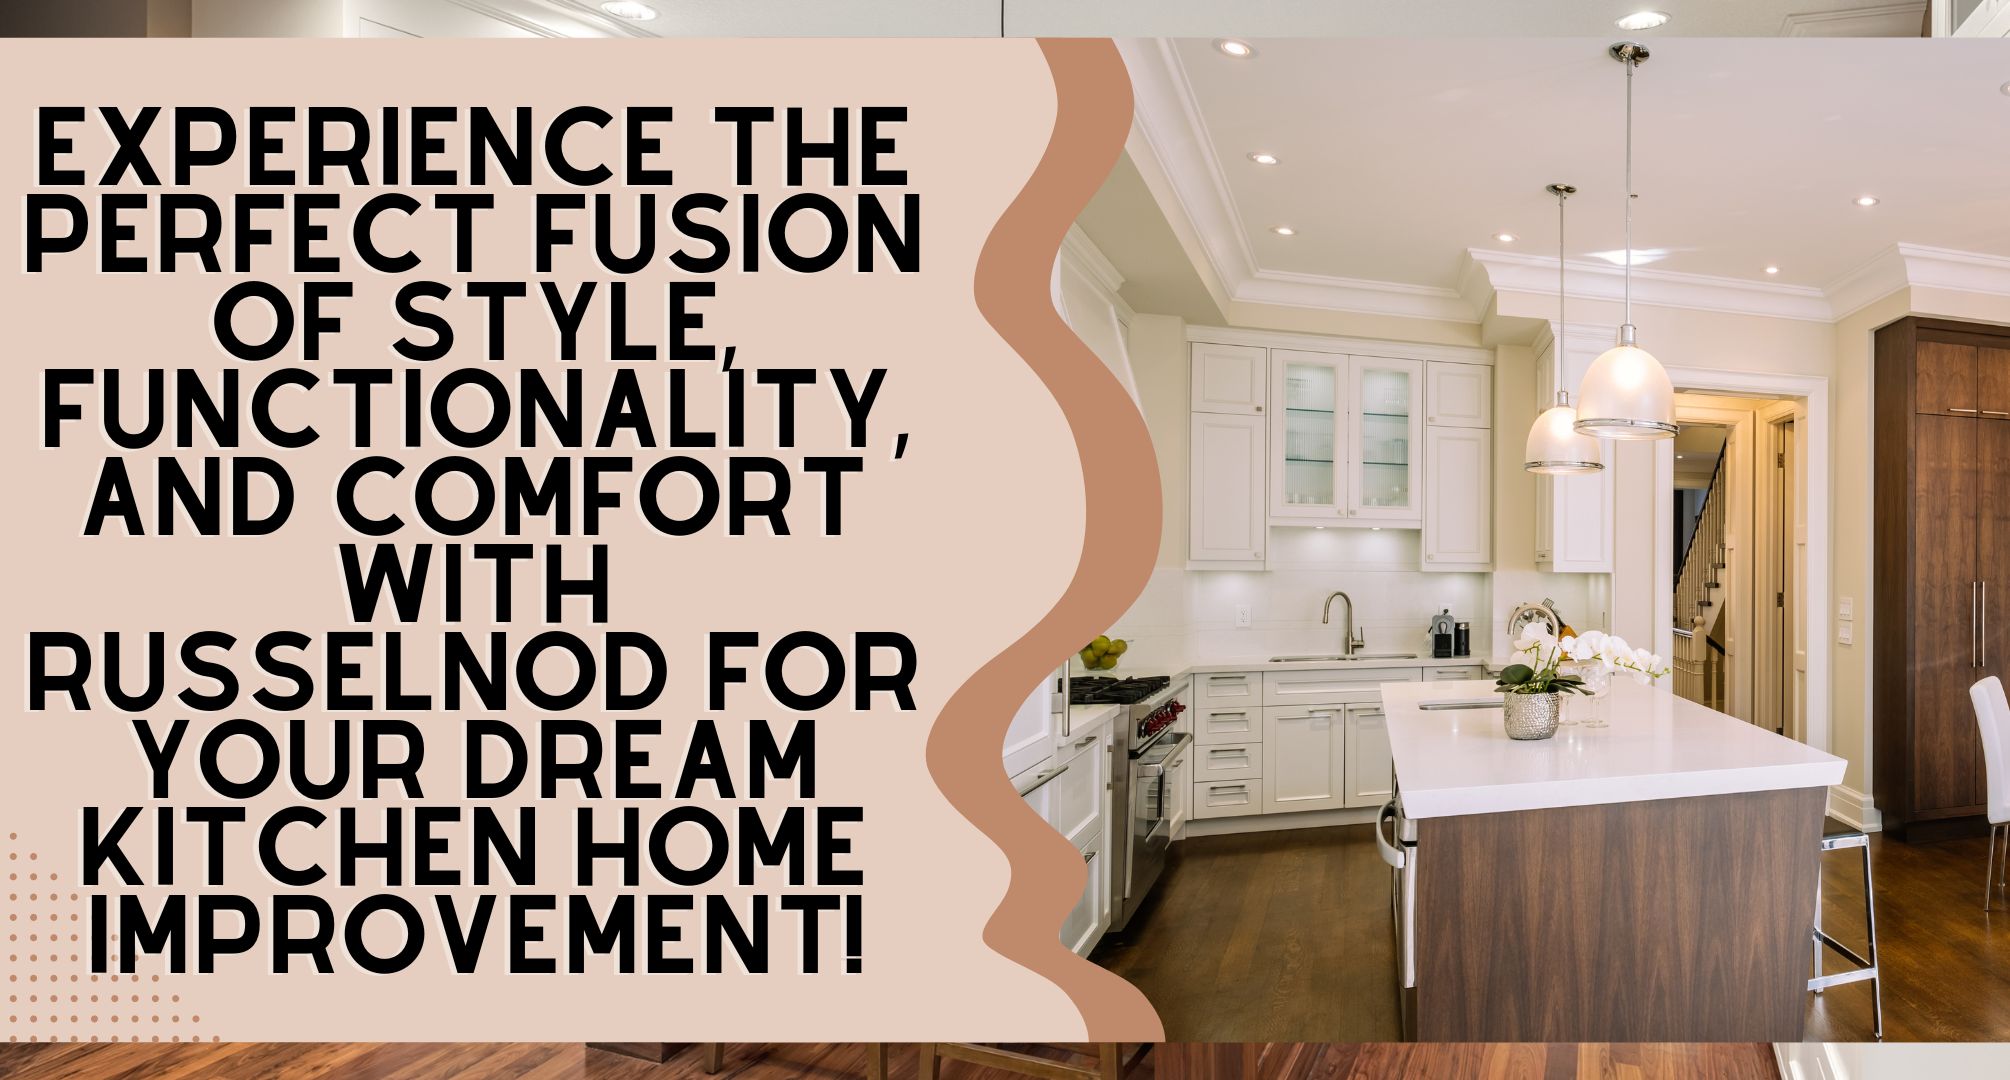 Experience the Perfect Fusion of Style, Functionality, and Comfort with Russelnod for Your Dream Kitchen Home Improvement!